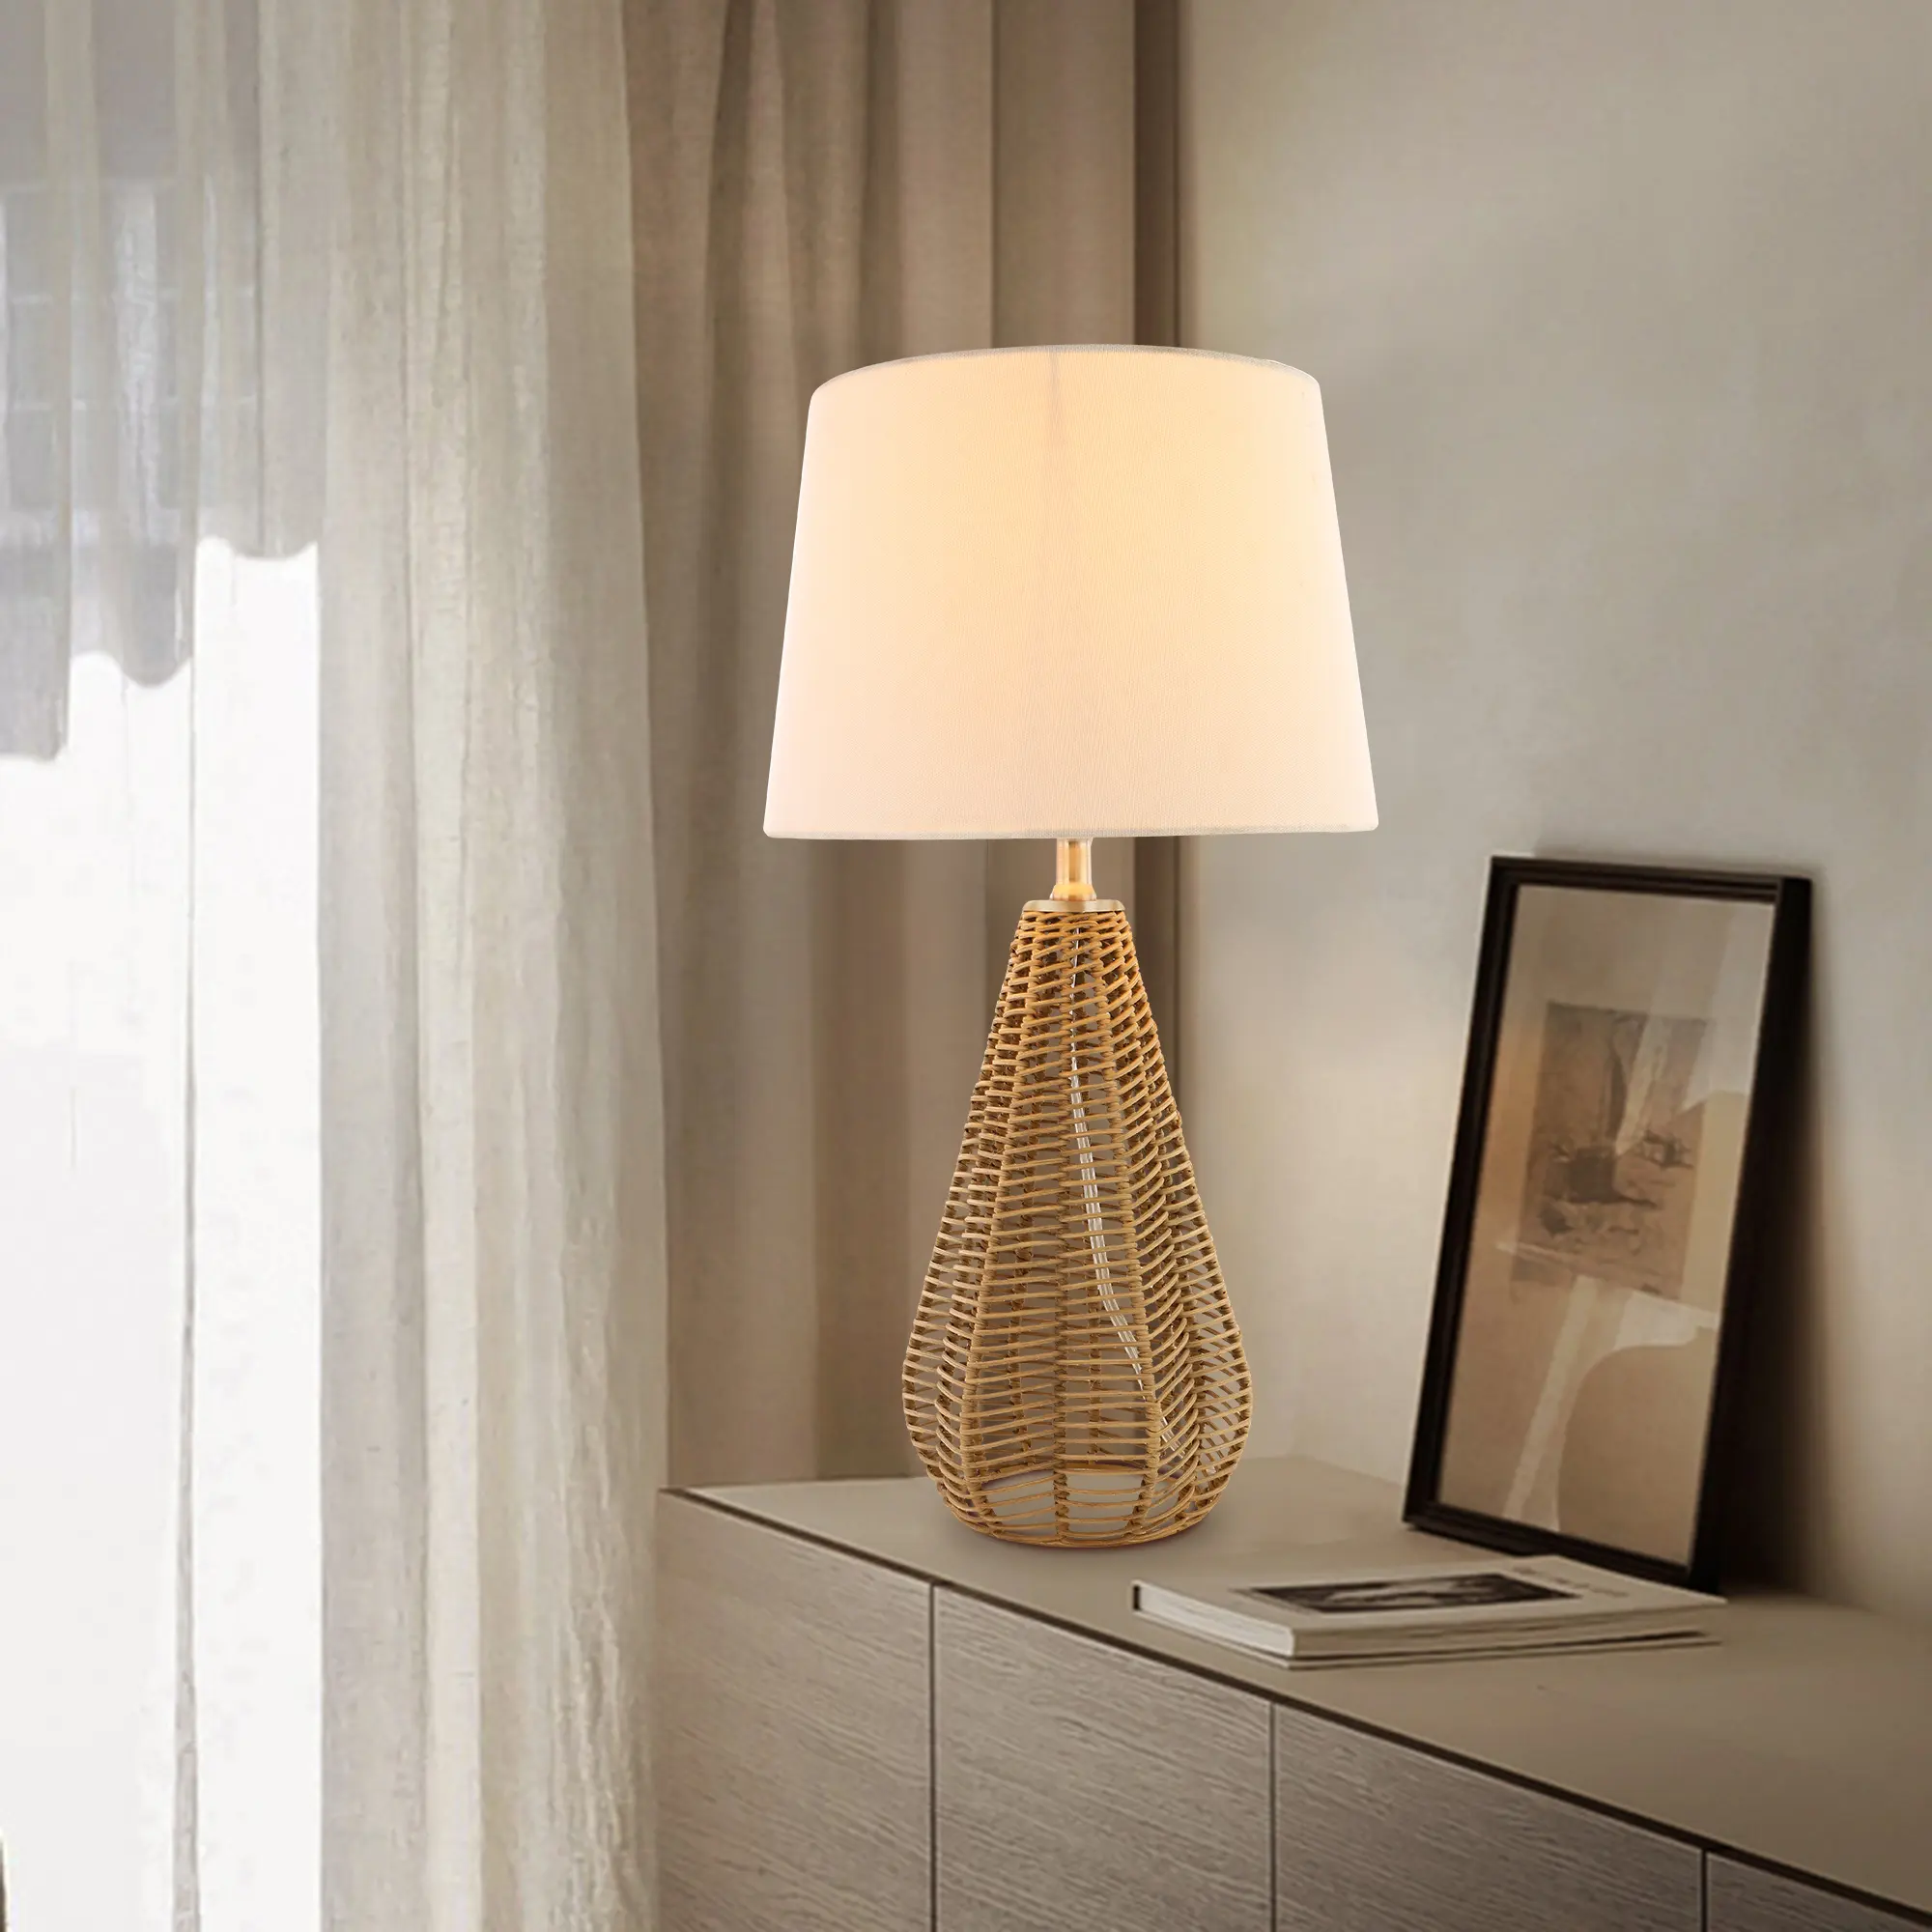 Simple rustic decoration table lamp with rattan lamp base and white drum lamp shade for living room and bedroom